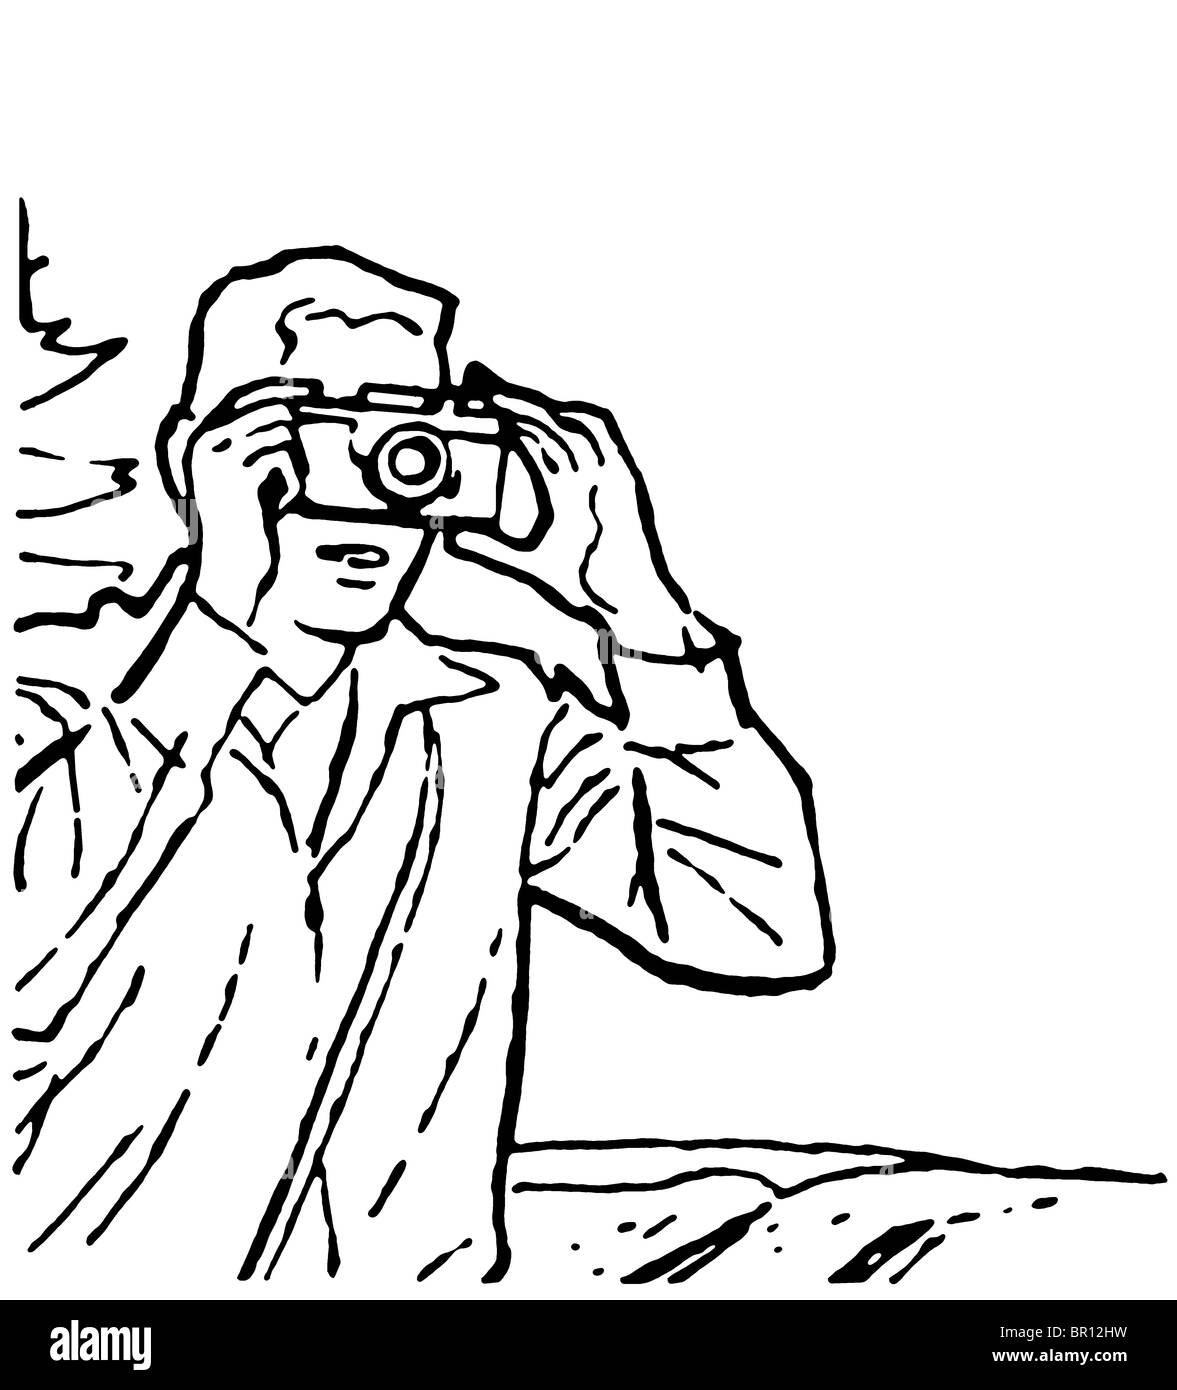 A black and white version of a vintage drawing of a man taking a photograph Stock Photo